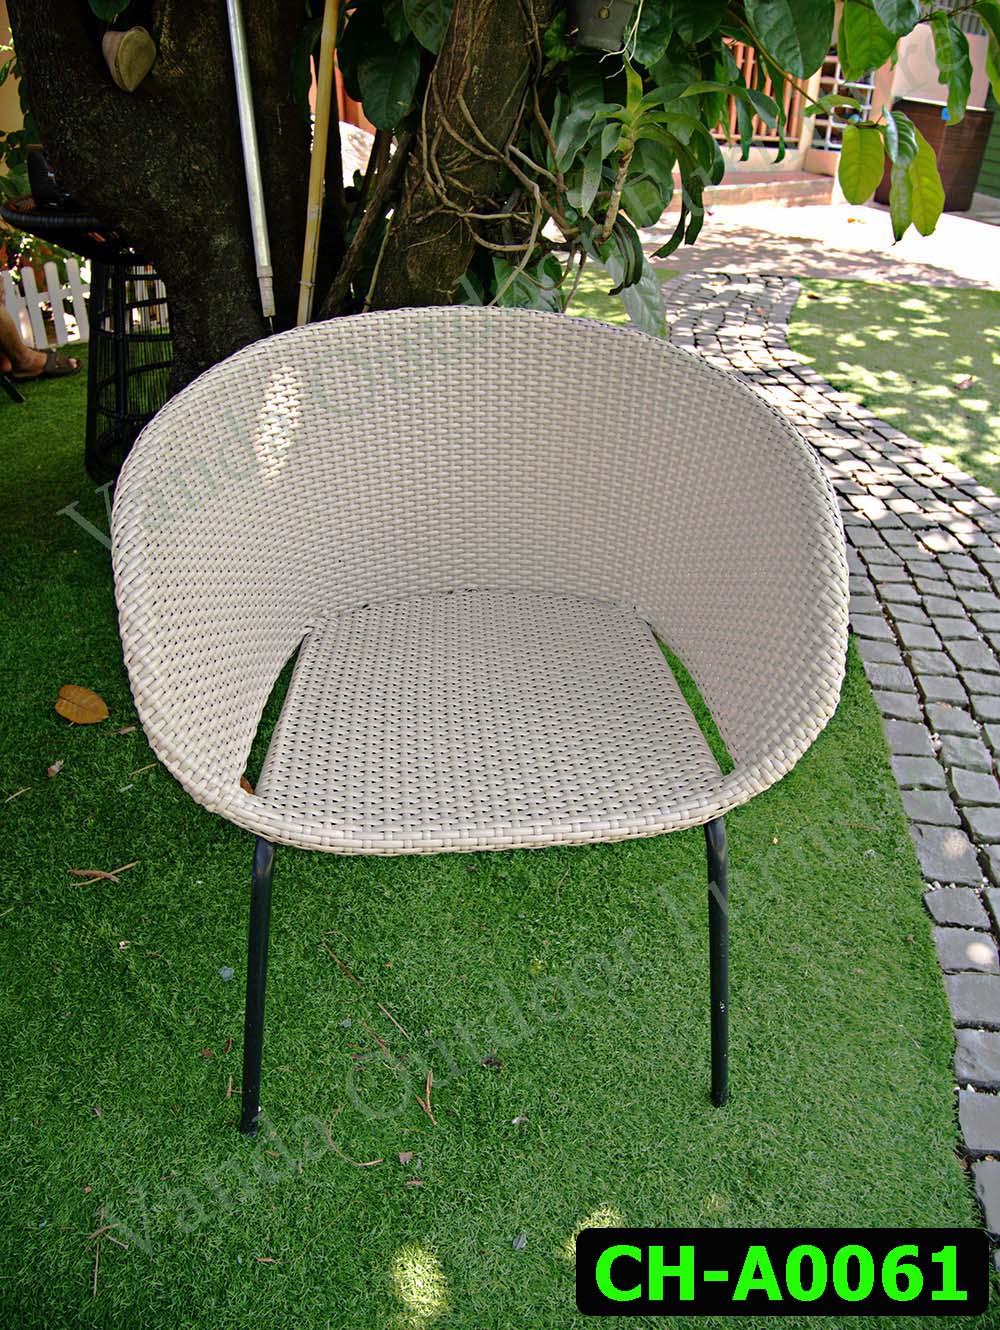 Rattan Chair Product code CH-A0061